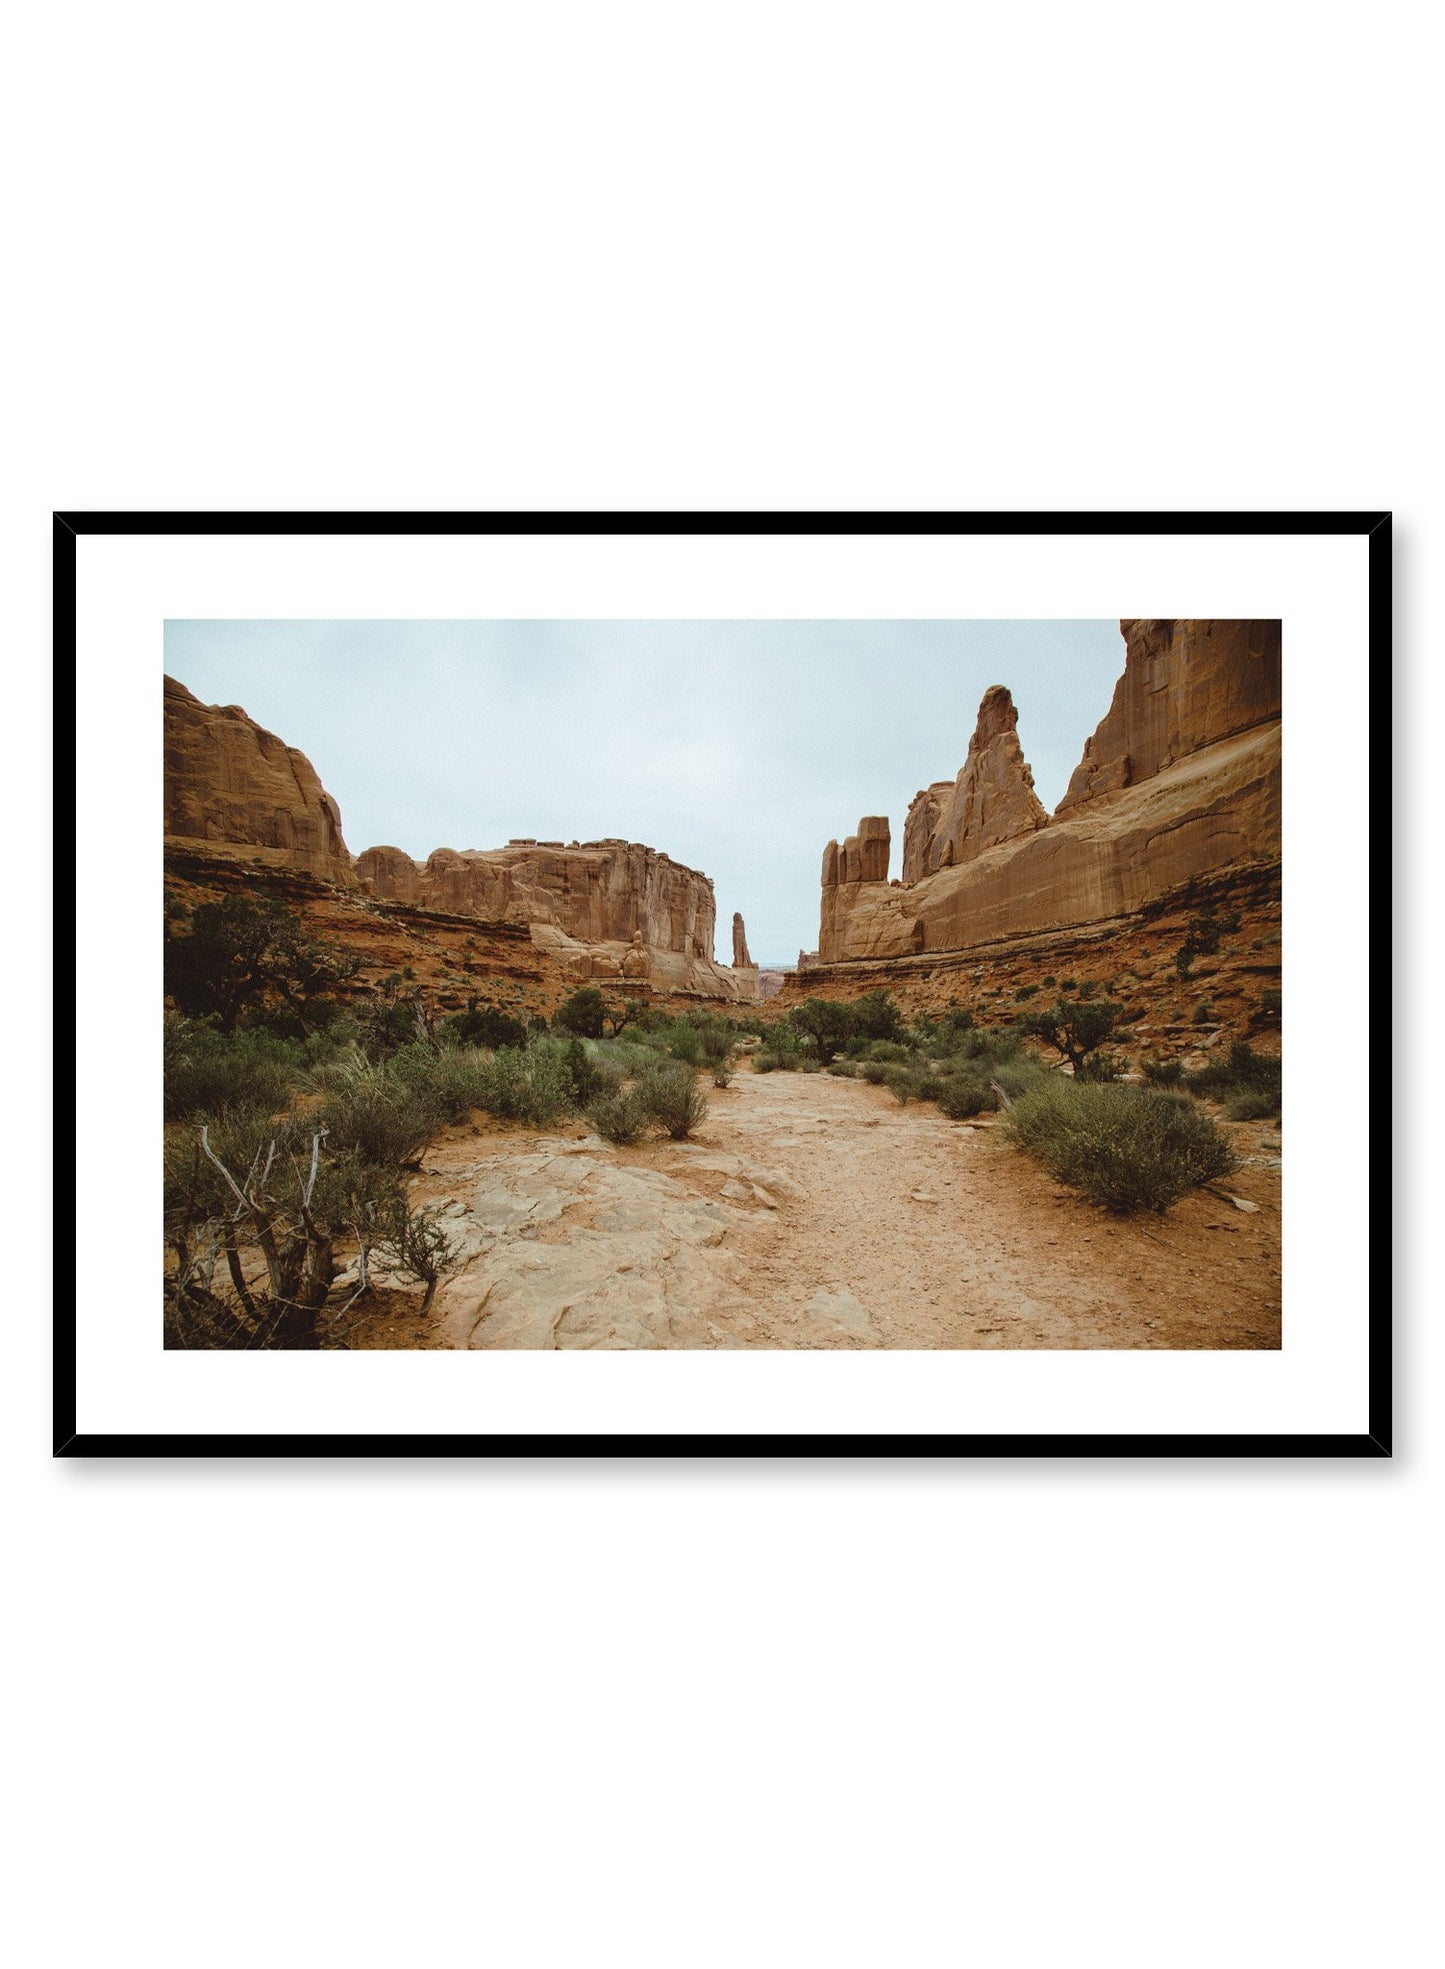 Modern landscape photography poster by Opposite Wall with rock formations in the desert.